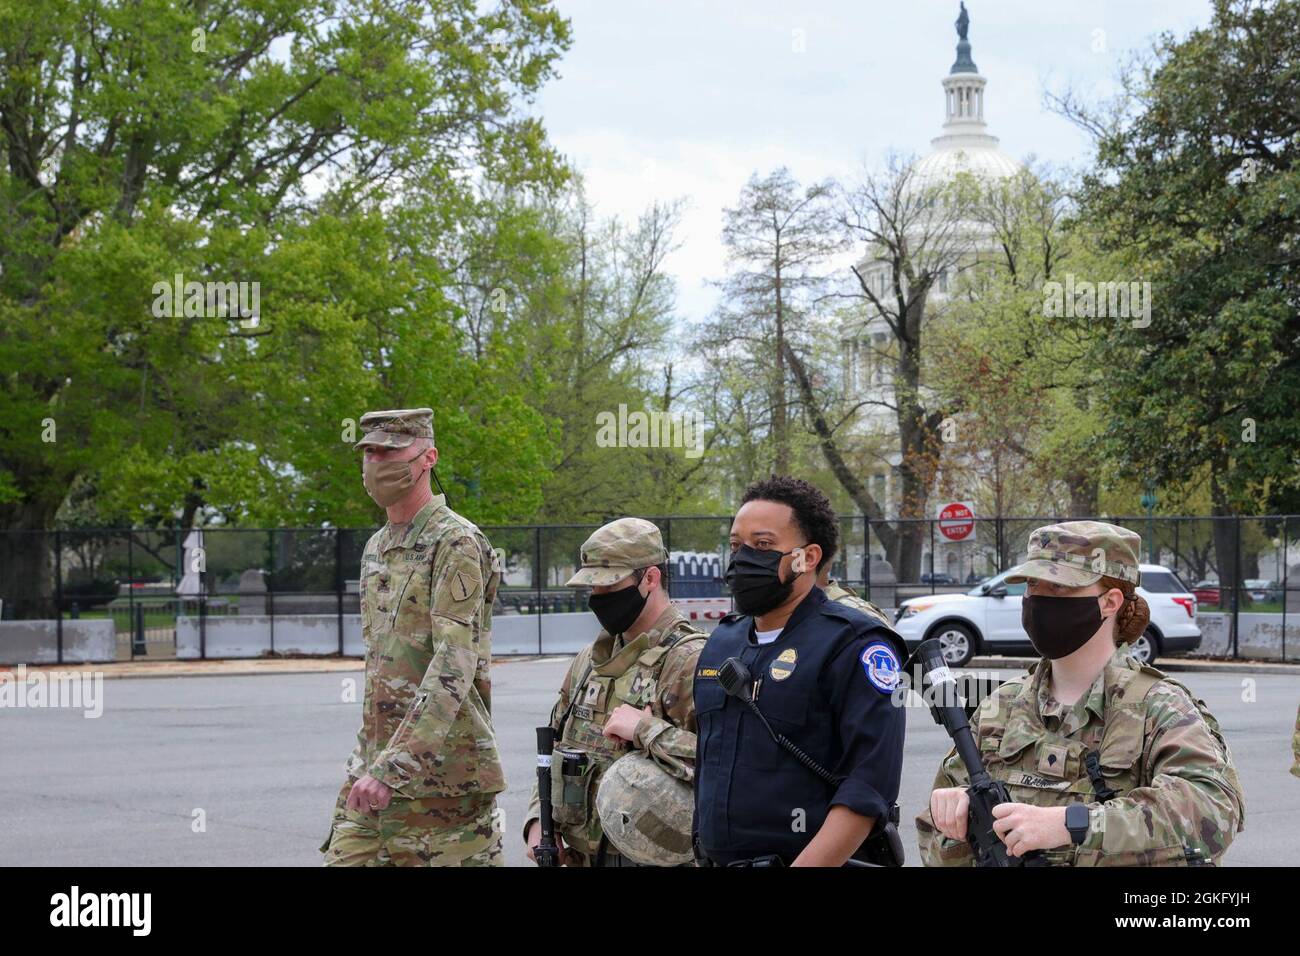 U.S. Capitol Police Officer Andre Womack II, center, conducts a patrol with U.S. Army Col. Brian Wertzler, left, deputy adjutant general, Kentucky National Guard, along with two other Soldiers, near the U.S. Capitol in Washington, D.C., April 12, 2021. The National Guard has been requested to continue supporting federal law enforcement agencies with security, communications, medical evacuation, logistics, and safety support to state, district and federal agencies through mid-May. Stock Photo